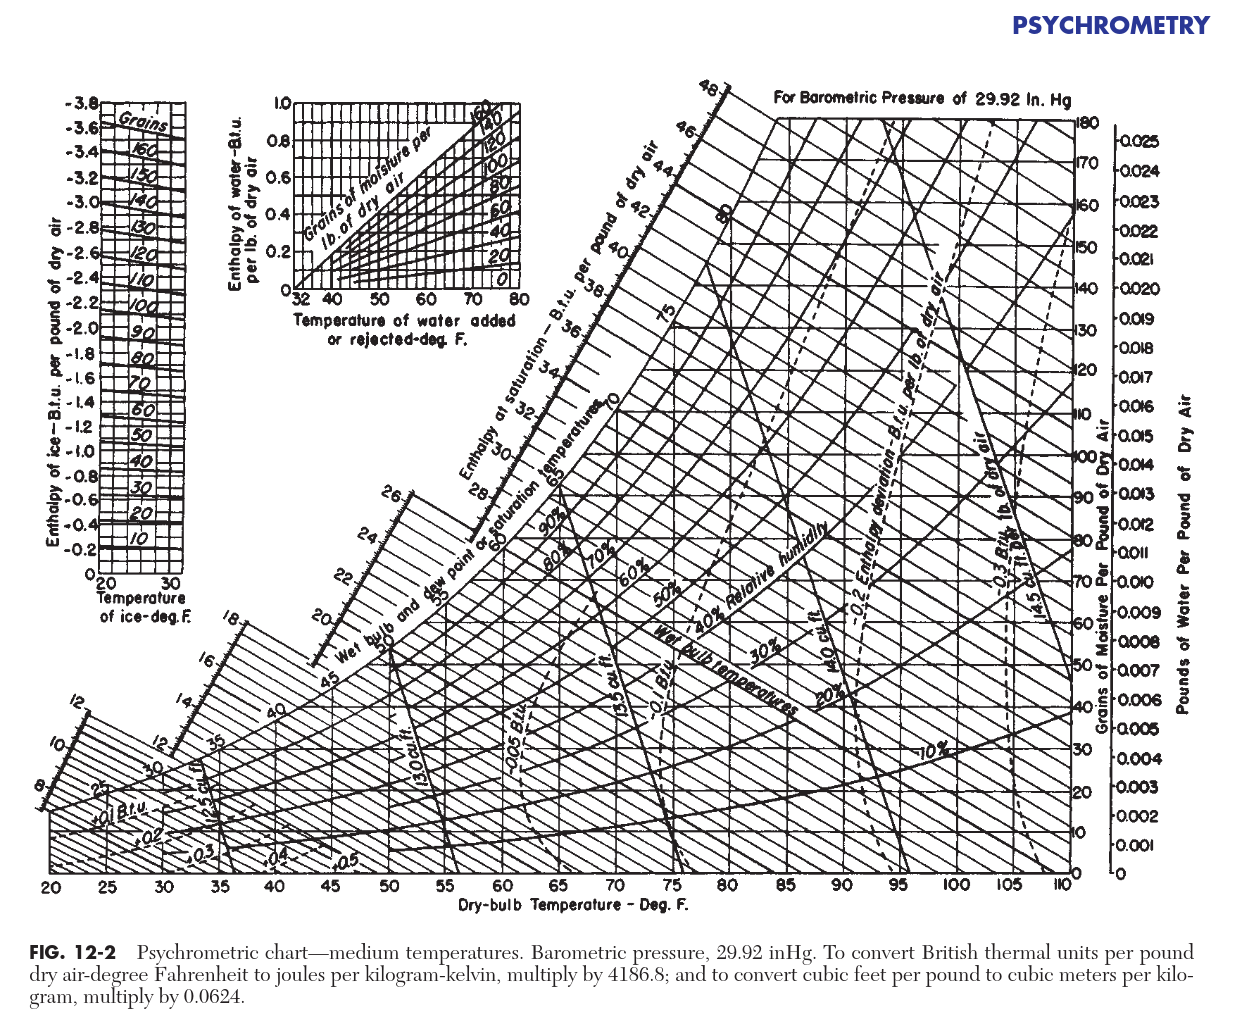 Of course, the value of the psychrometric ratio could be hiding in this psychrometric chart somewhere; I know if I wanted to hide a physical constant that’s definitely where I’d put it. Pro-tip: despite what the axes might lead you to believe, vertical lines are not isotherms. In fact the axes are specific humidity on the vertical axis and specific enthalpy on the diagonal – lines of constant temperature diverge very slightly as they go up.